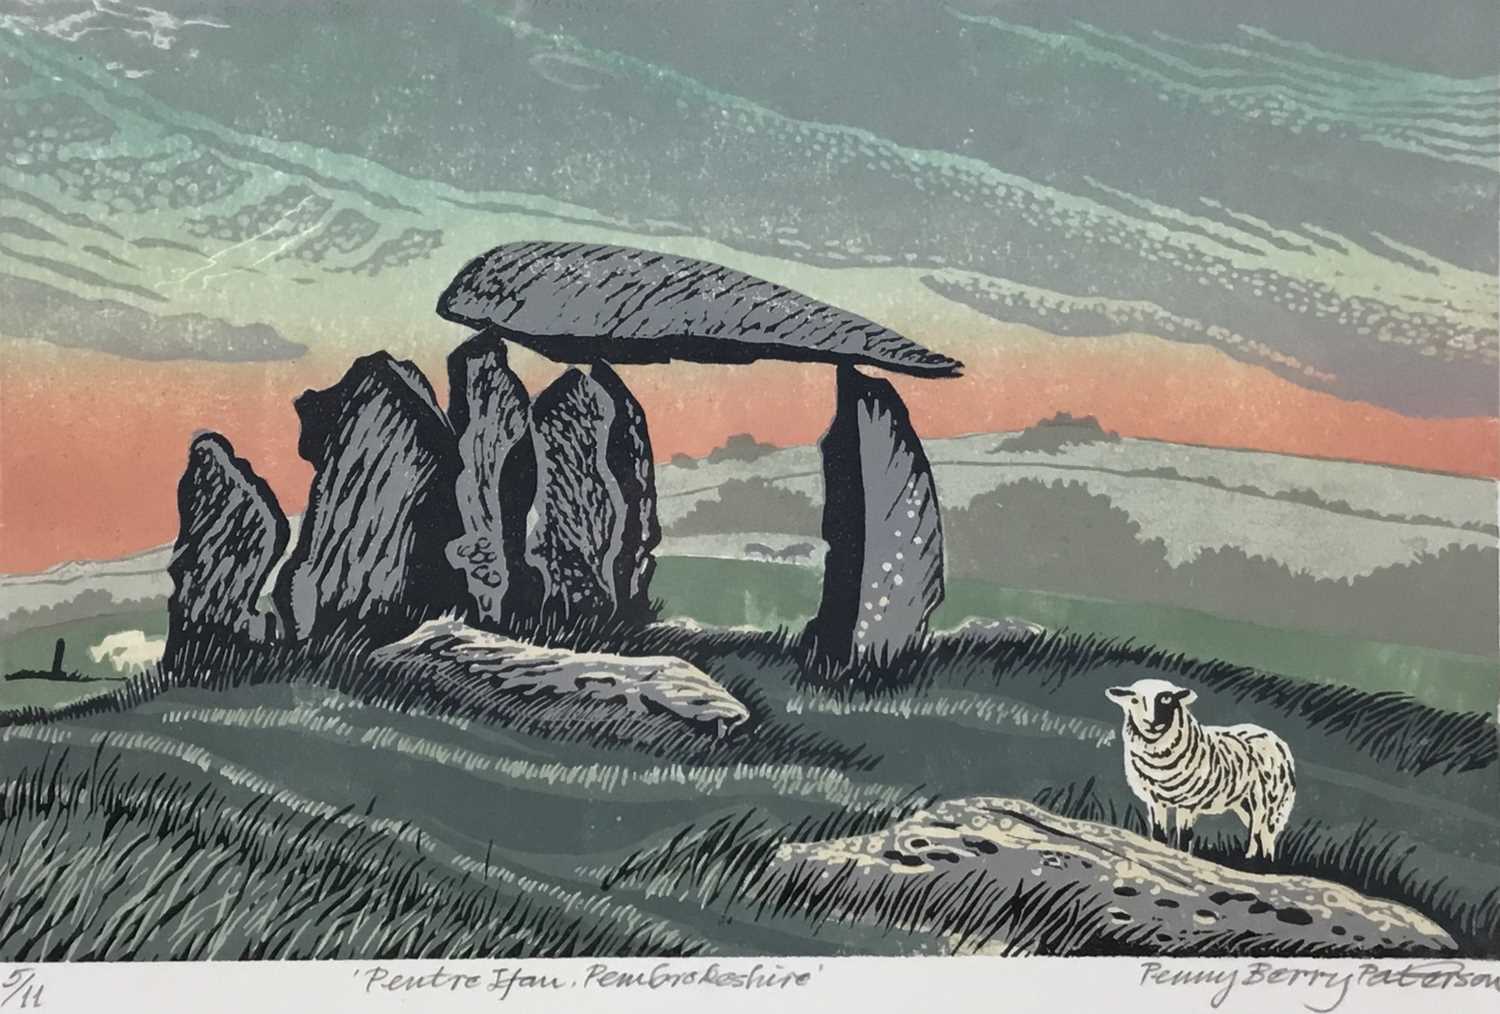 Lot 212 - Penny Berry Paterson (1941-2021) colour linocut print, Pentre Ifan, Pembrokeshire, signed inscribed and numbered 5/11, image 22 x 32cm, together with another by the same hand - Stone Circle, Mull